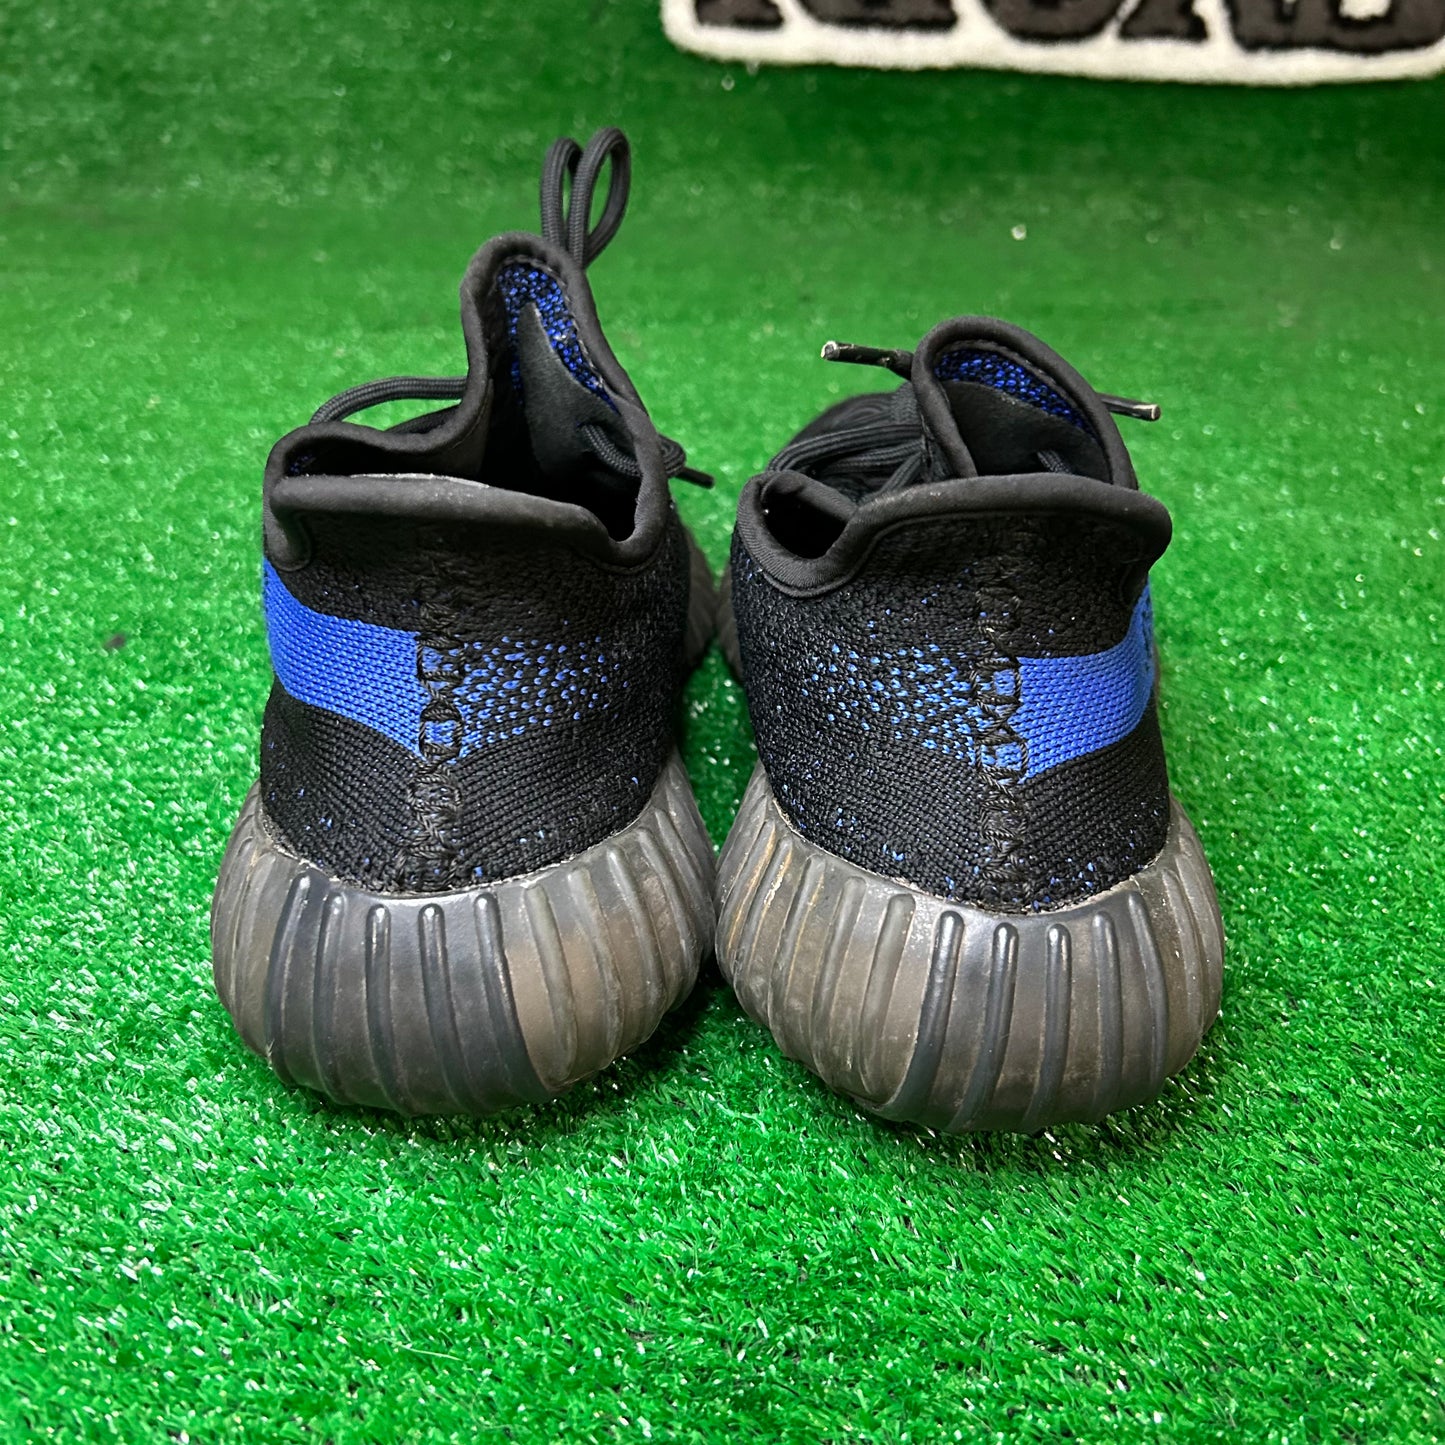 Yeezy Boost 350 V2 Dazzling Blue (Pre-Owned)